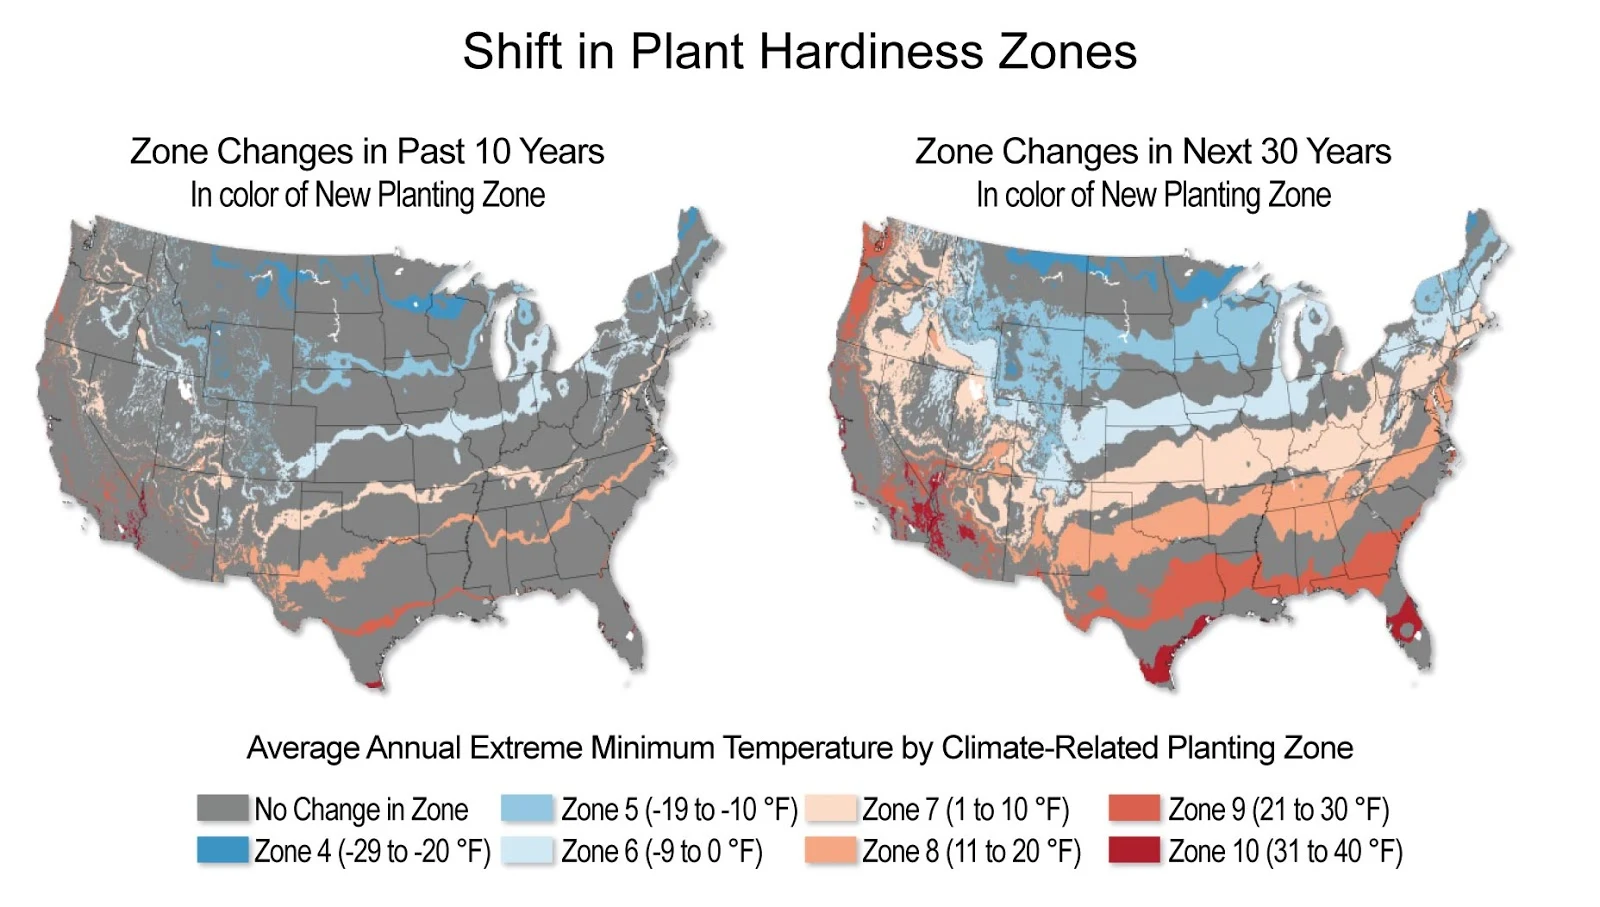 Shift in plant USDA hardiness zones in the United States